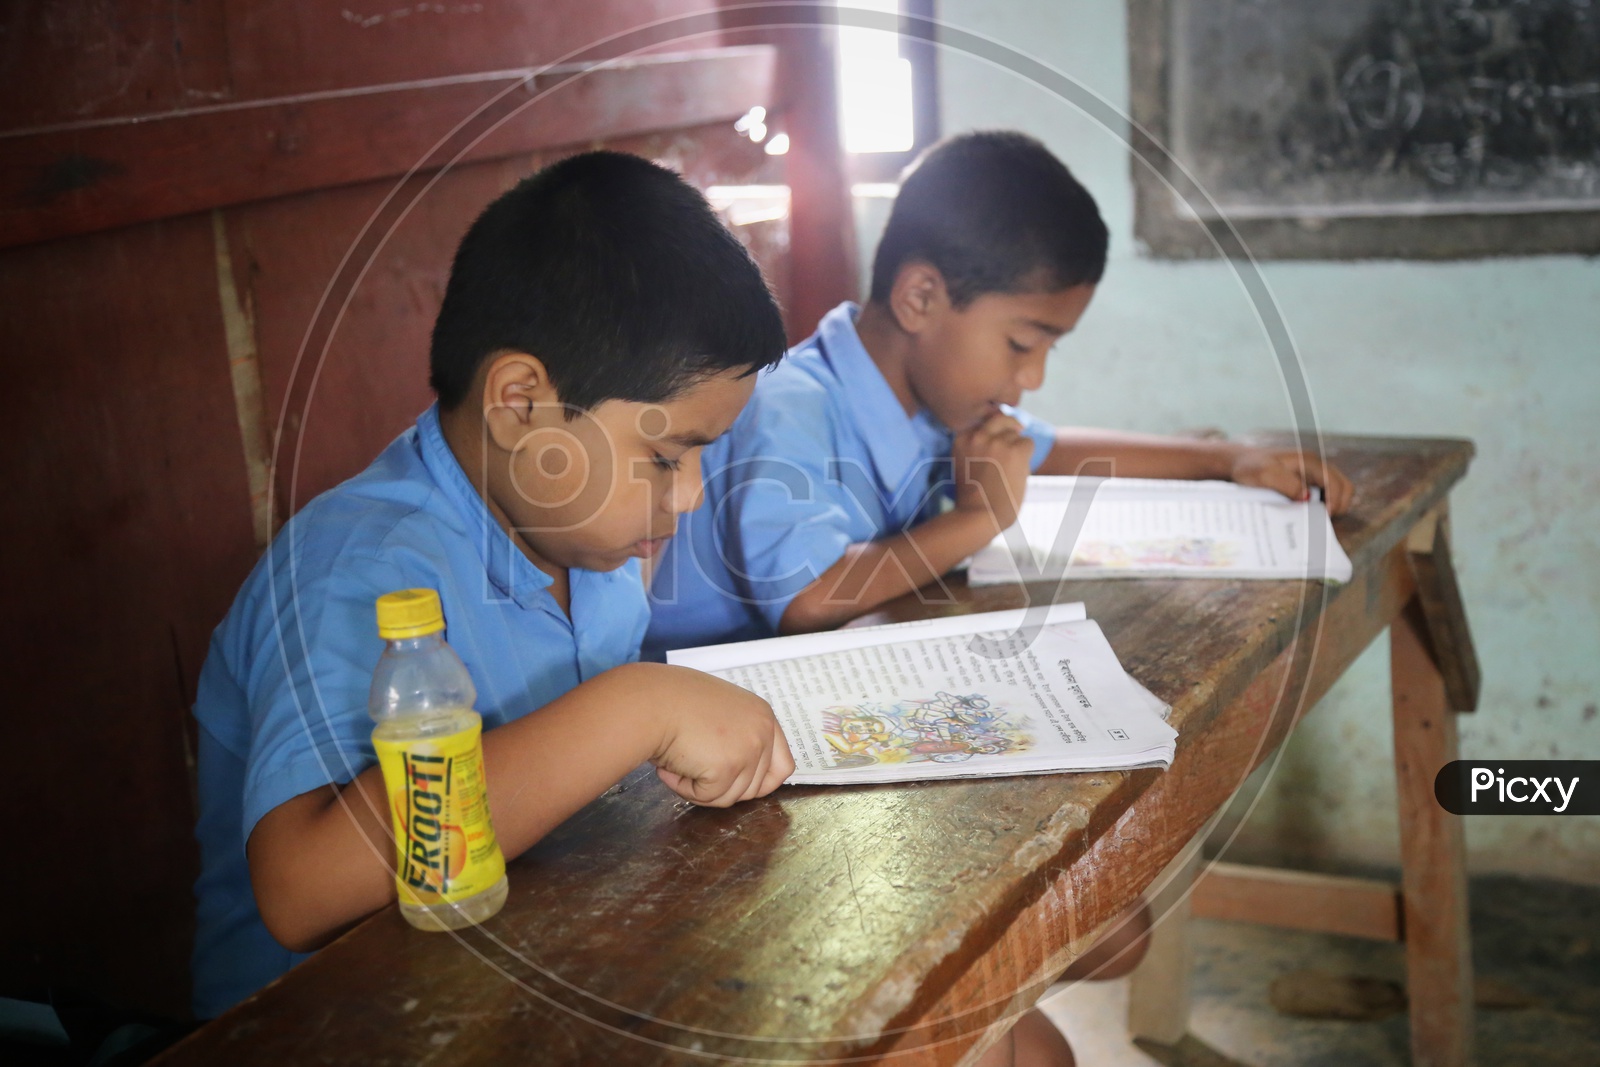 School Children or School Students In Uniforms With Books  Infront Of Them in A Classroom